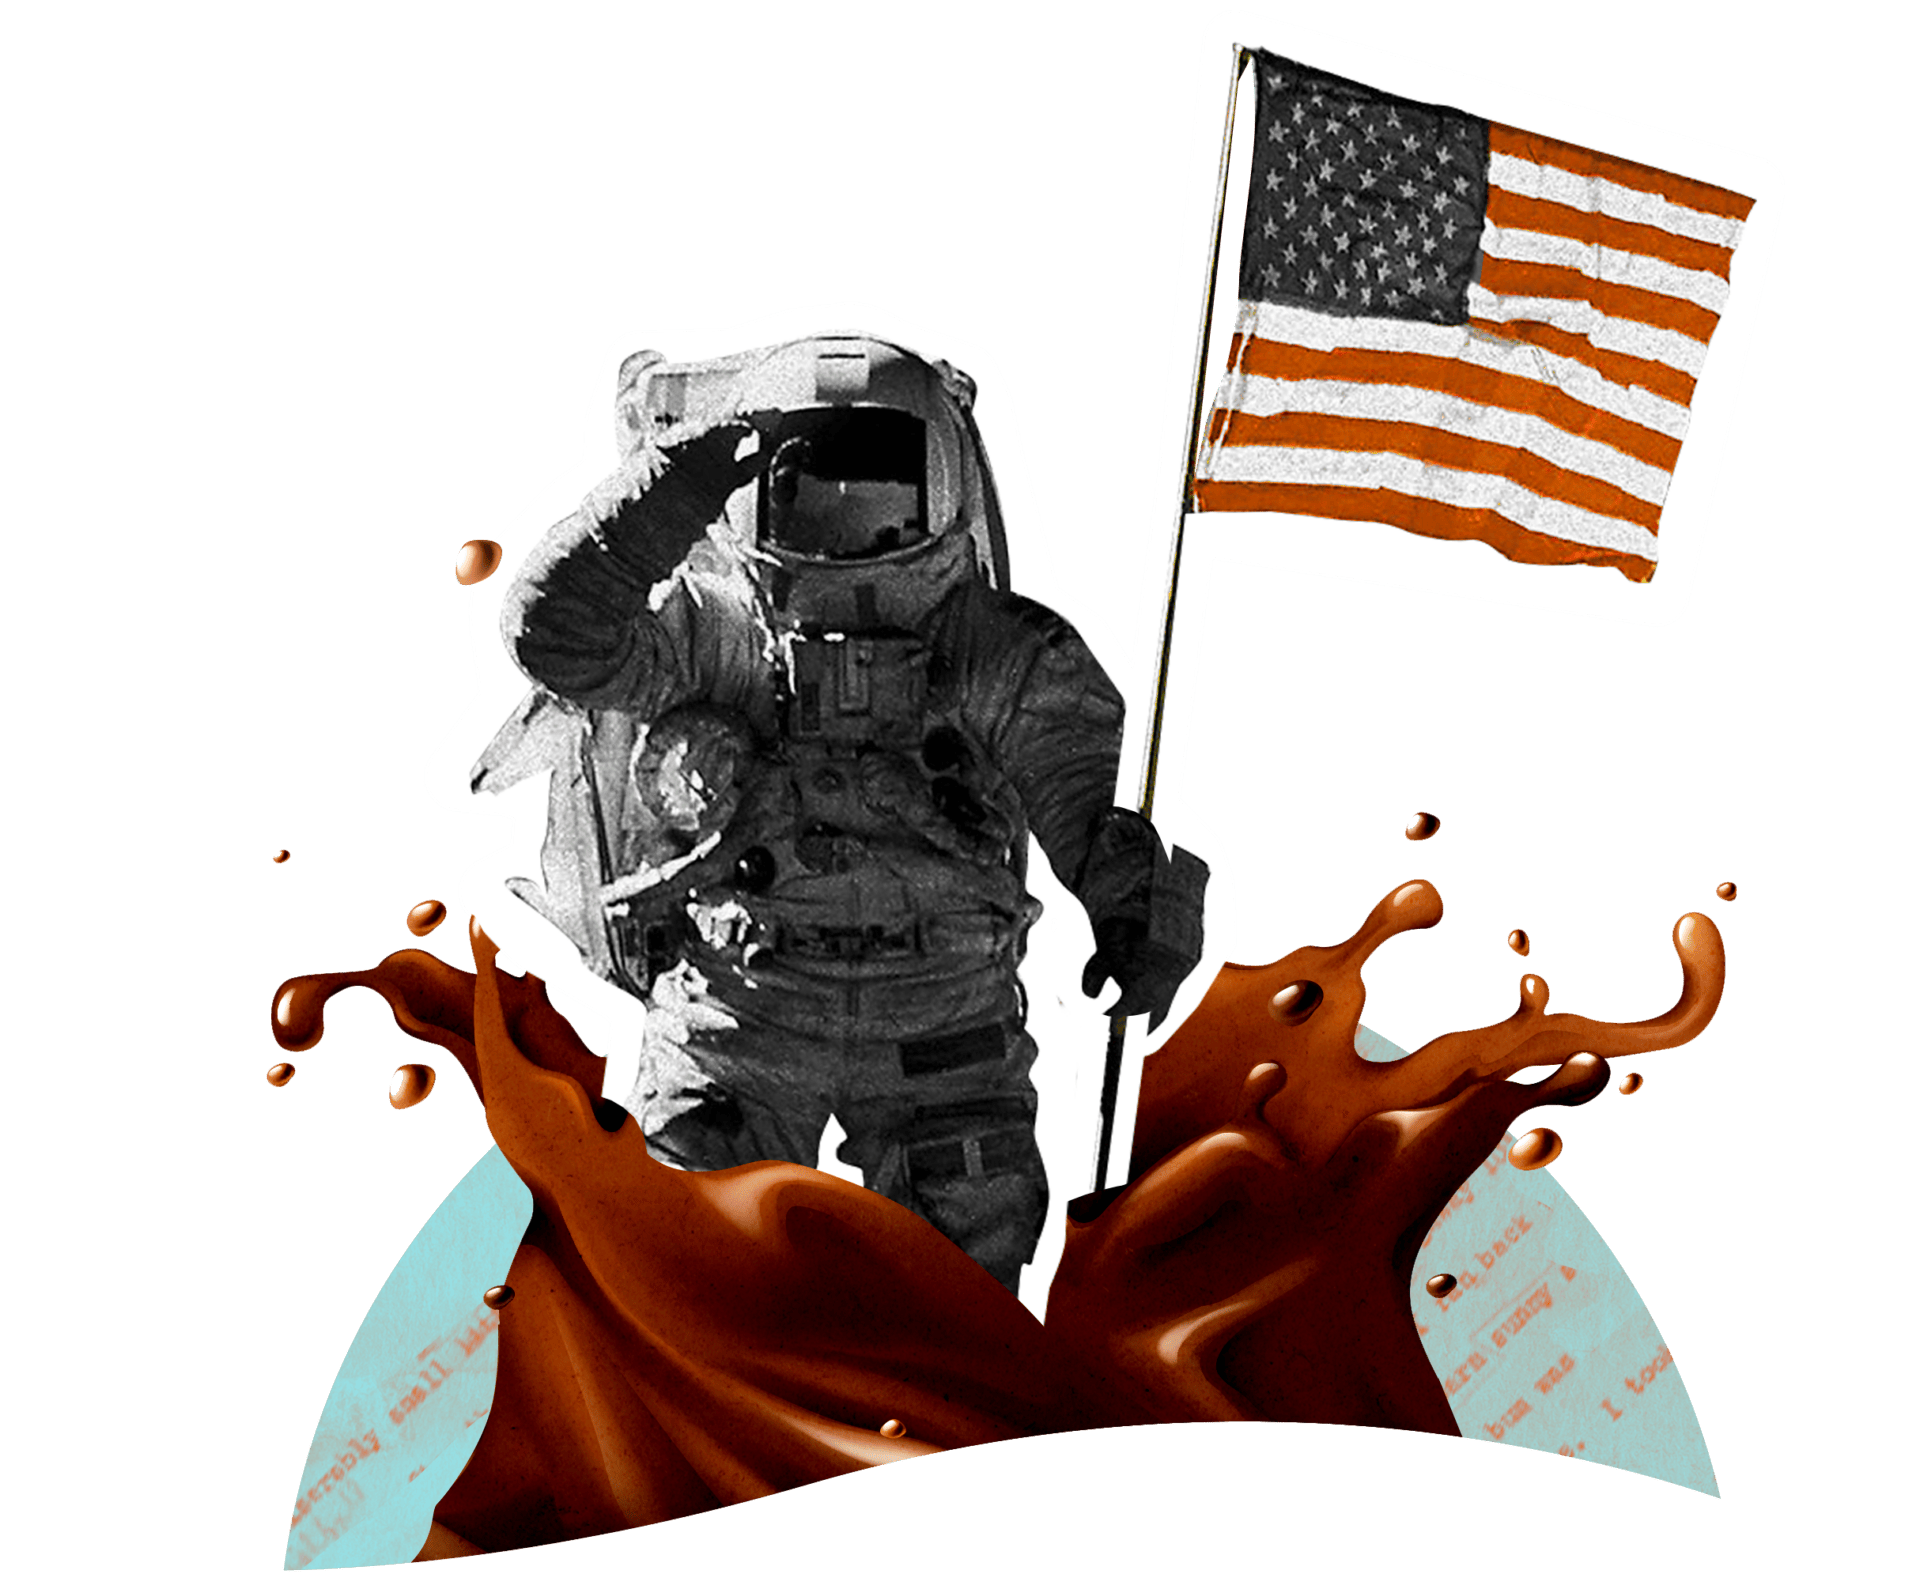 An astronaut holding a u.s. flag, emerging from a splash of brown liquid with fragments of a world map visible.